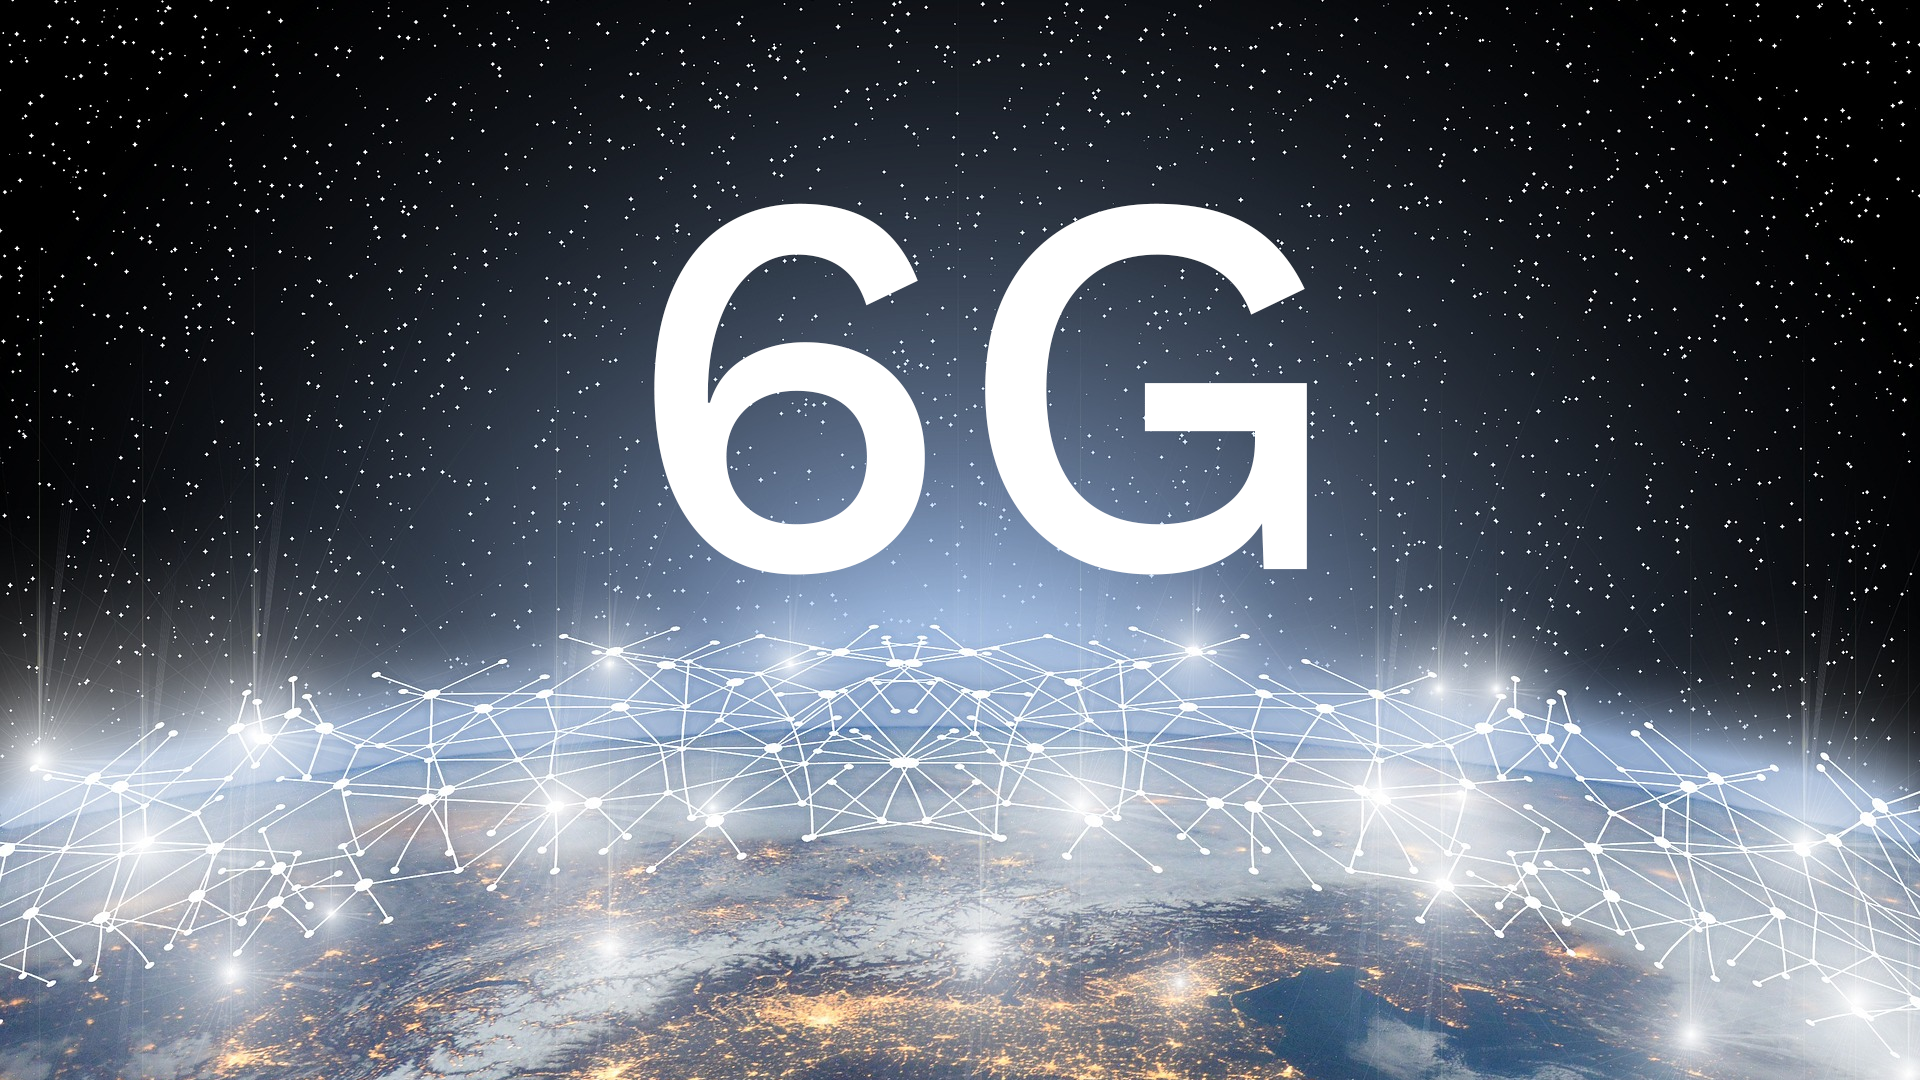 while 5g is still in infancy level, 6g is already making its name